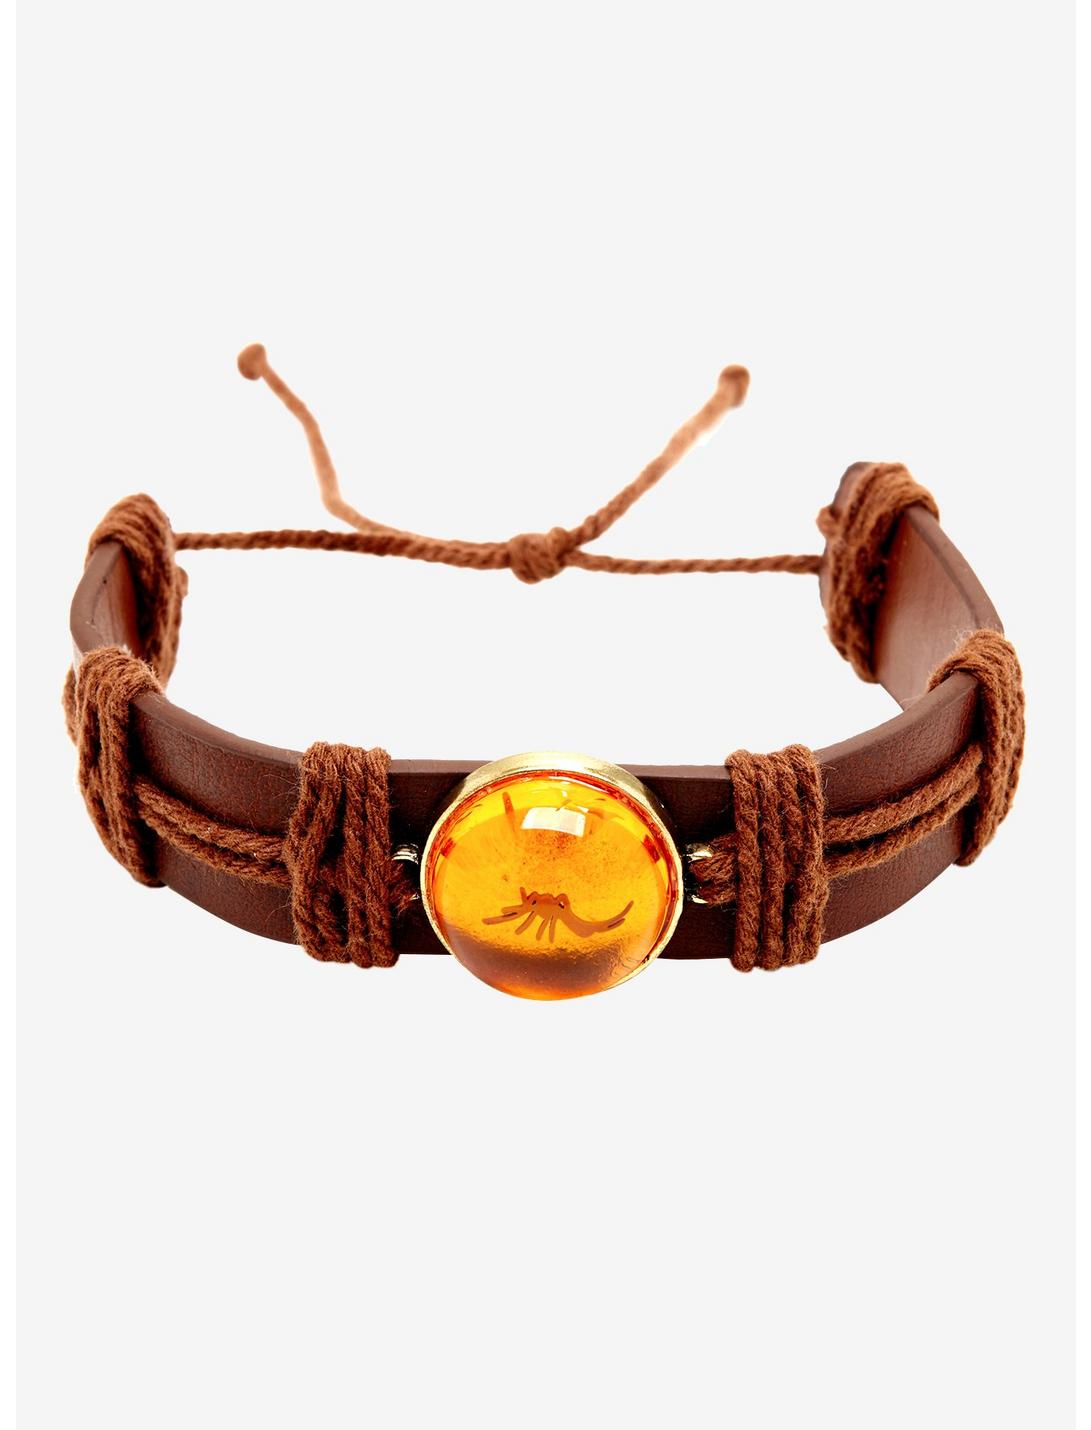 Jurassic Park Mosquito In Amber Faux Leather Bracelet, , hi-res